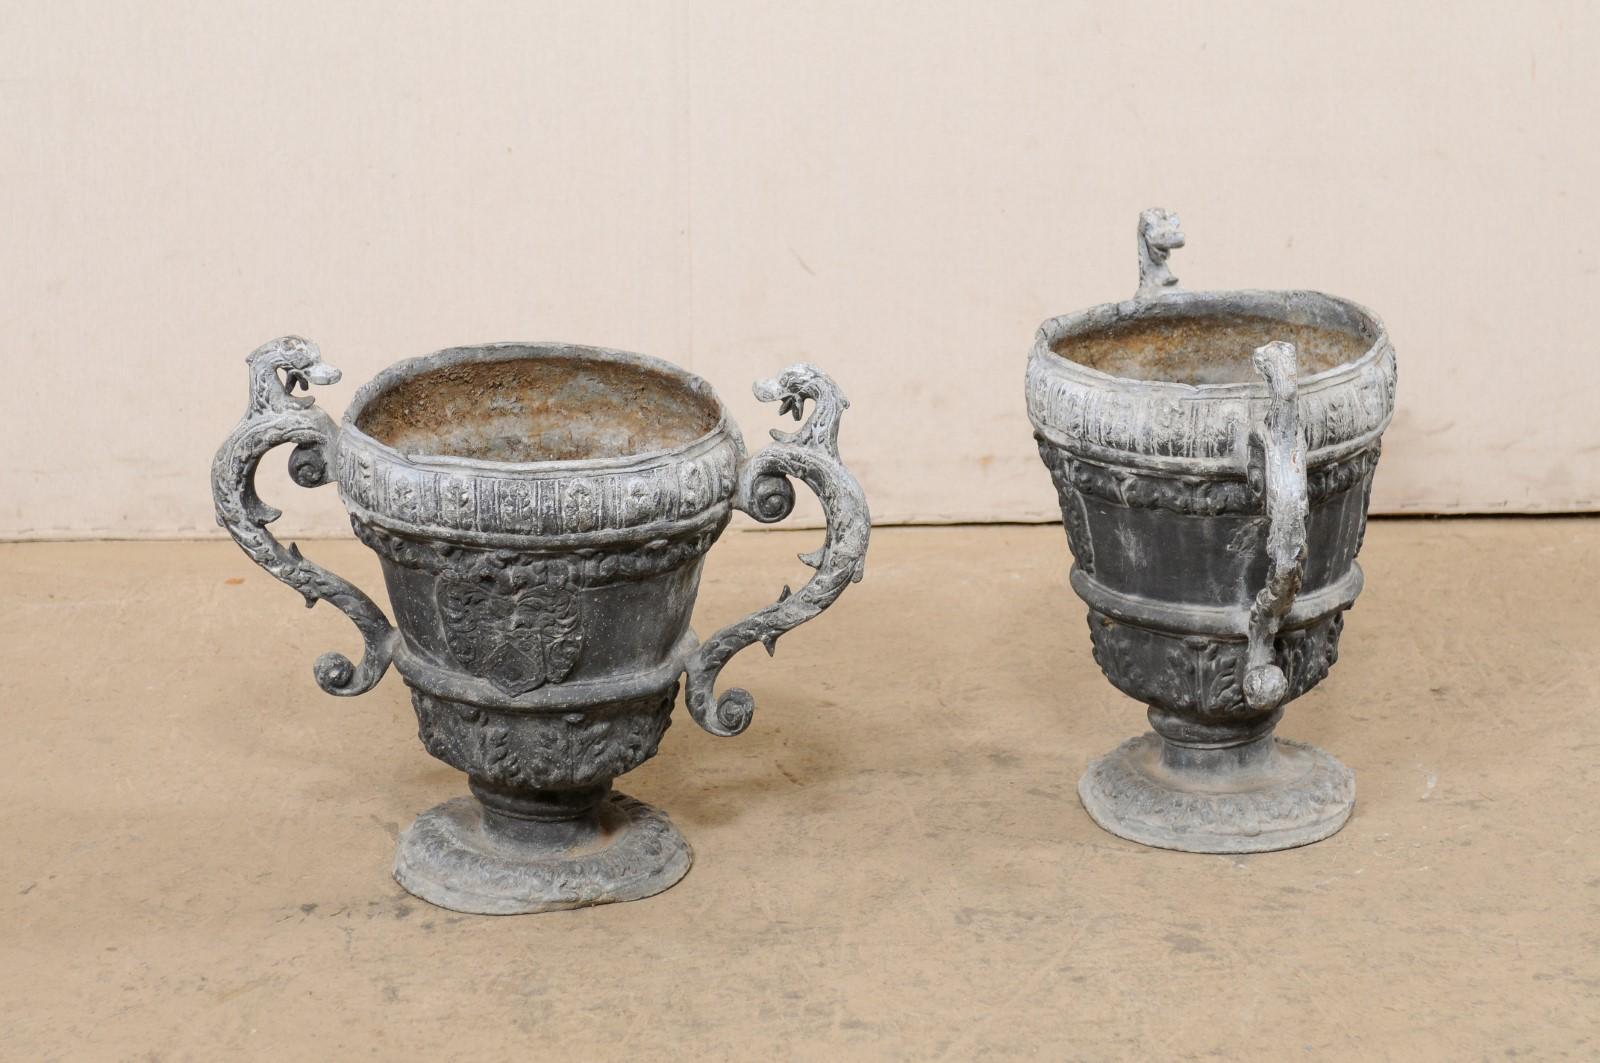 French Pair of 18th C. Decorative Lead Urn Planters for Garden Patio For Sale 4